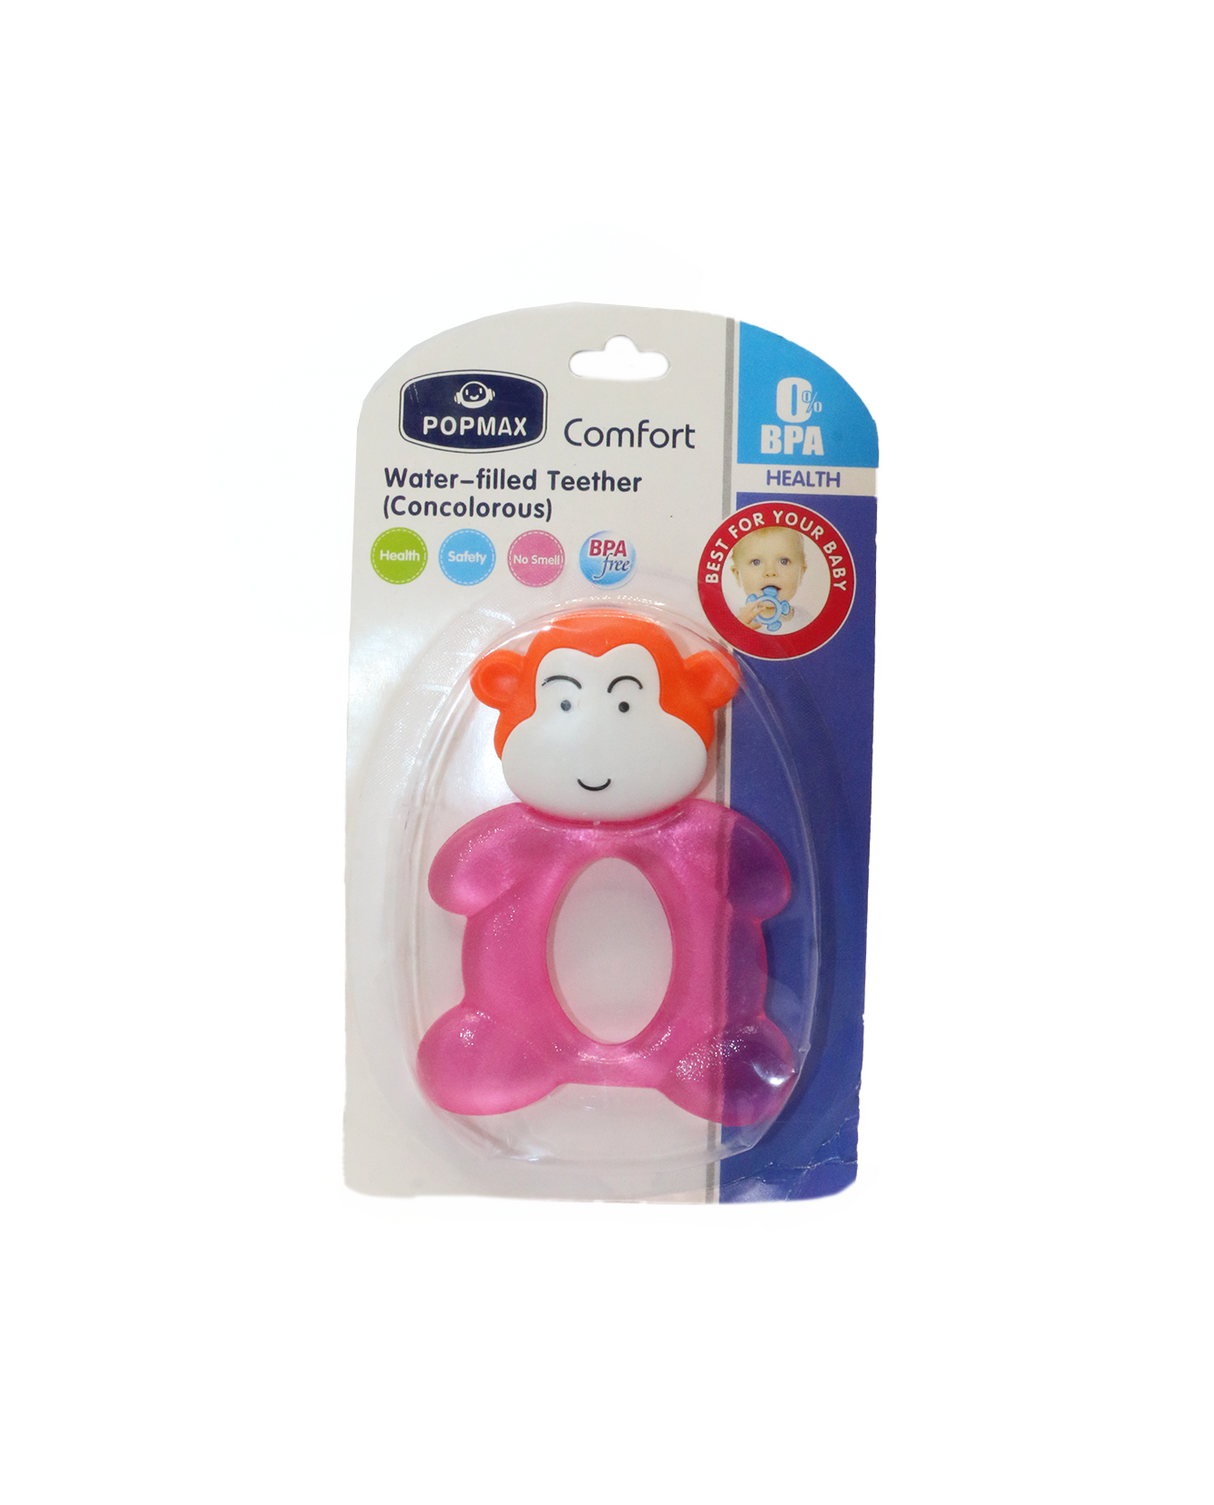 popmax water filled teether po-6030